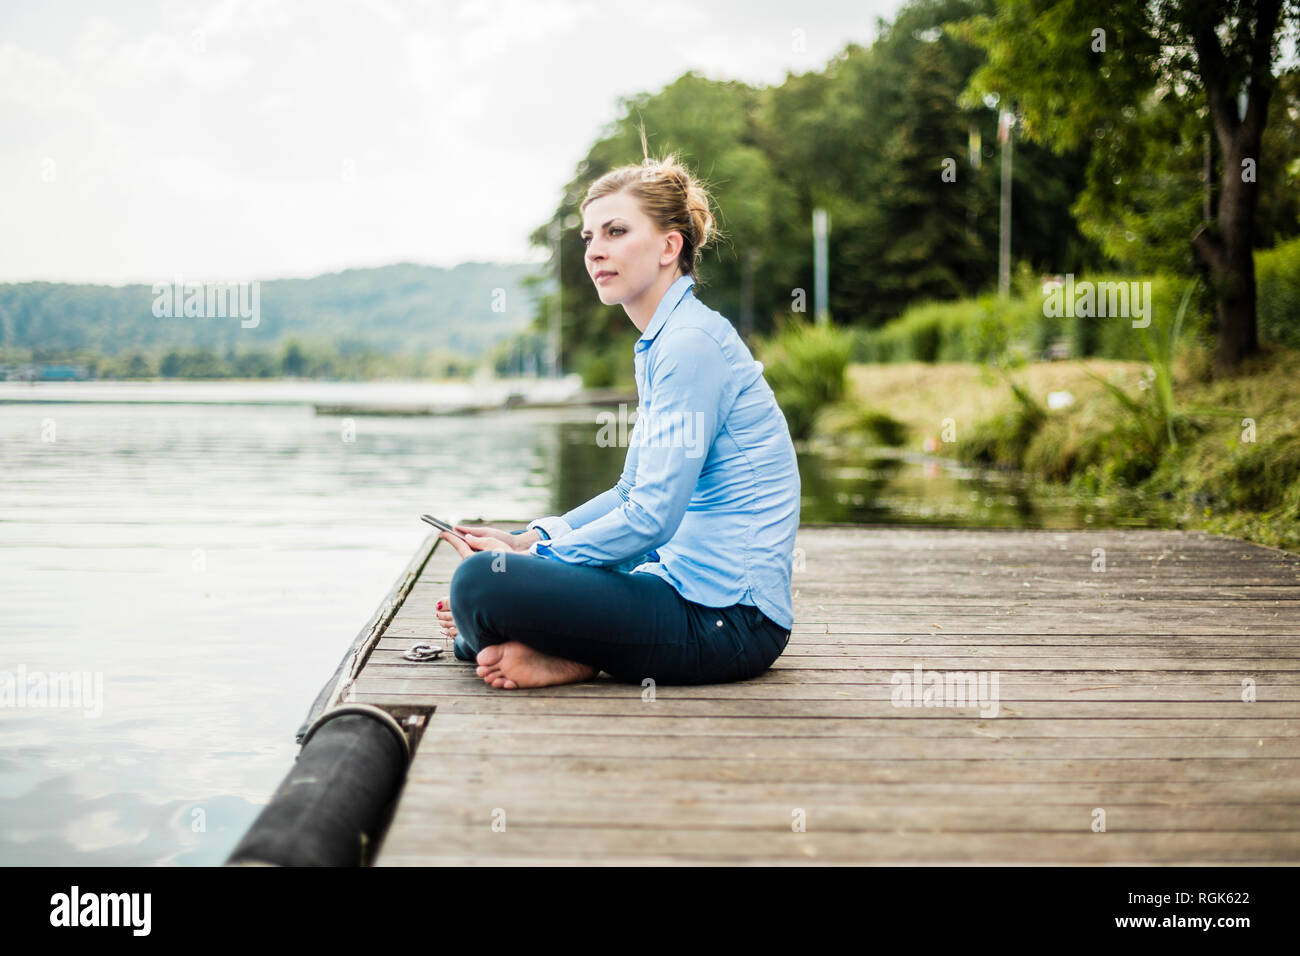 Woman sitting on jetty at a lake using tablet Stock Photo